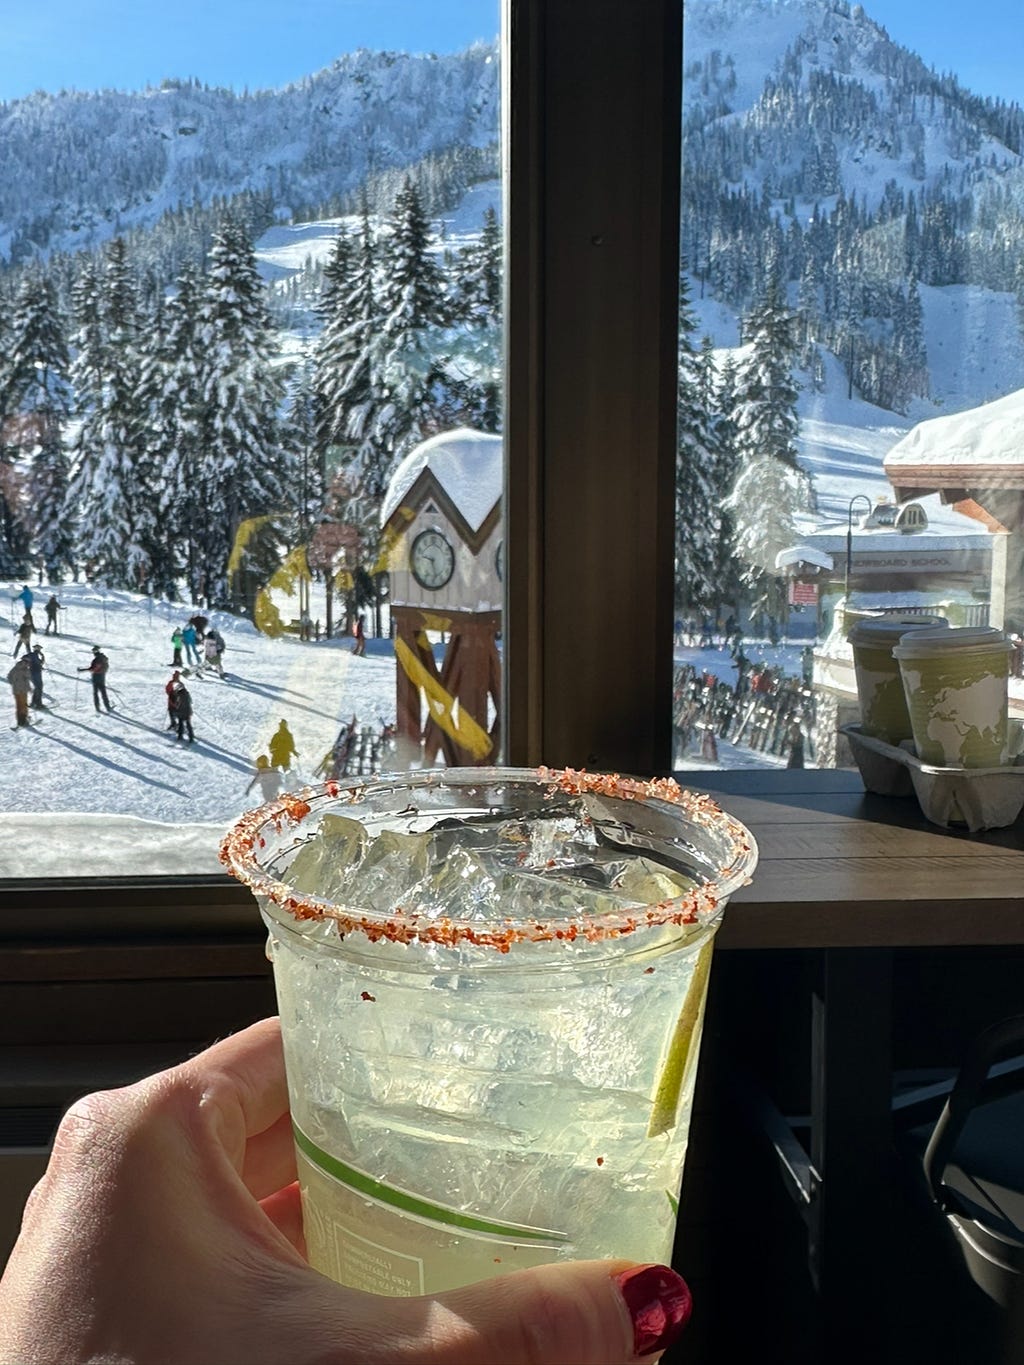 Aforementioned iconic Stevens’ Pass margaritas